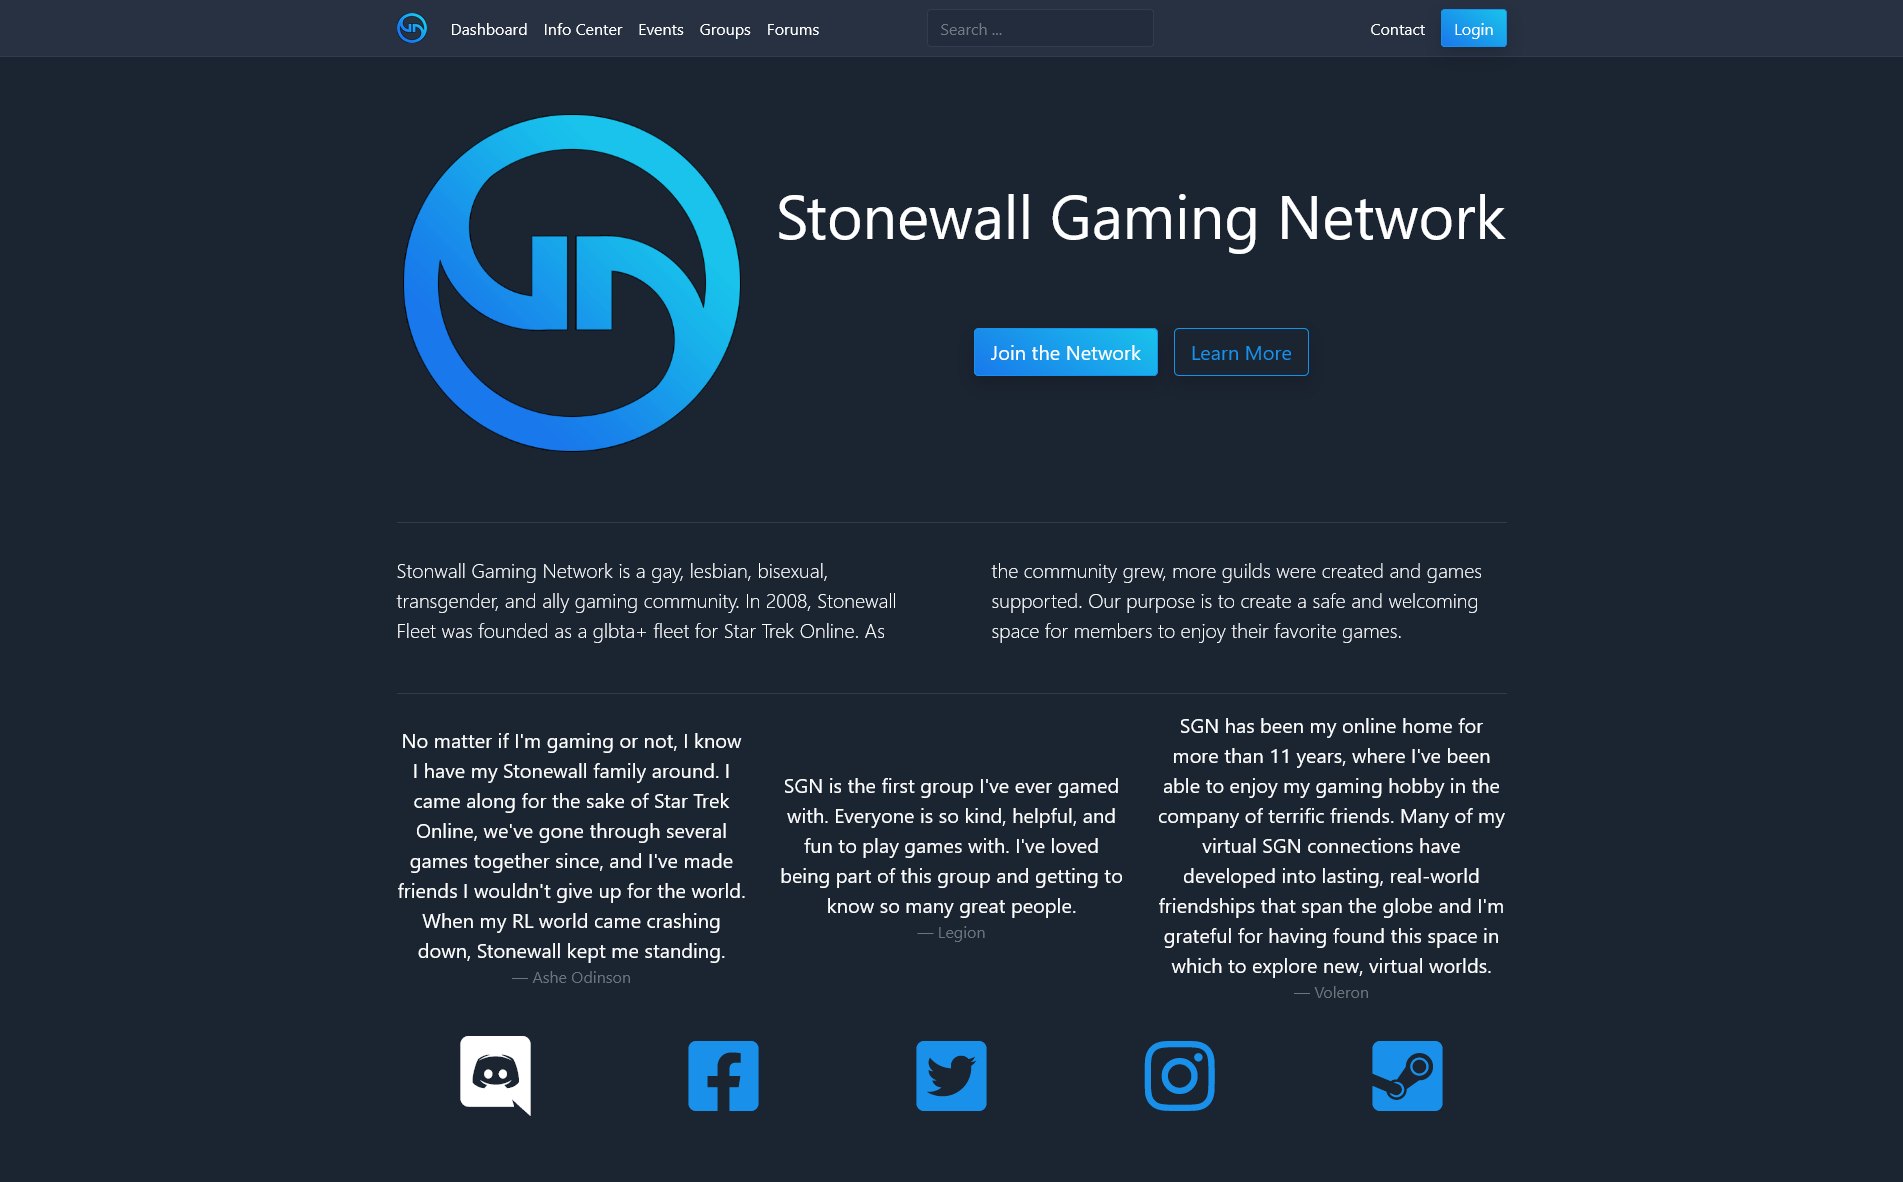 SGN landing page